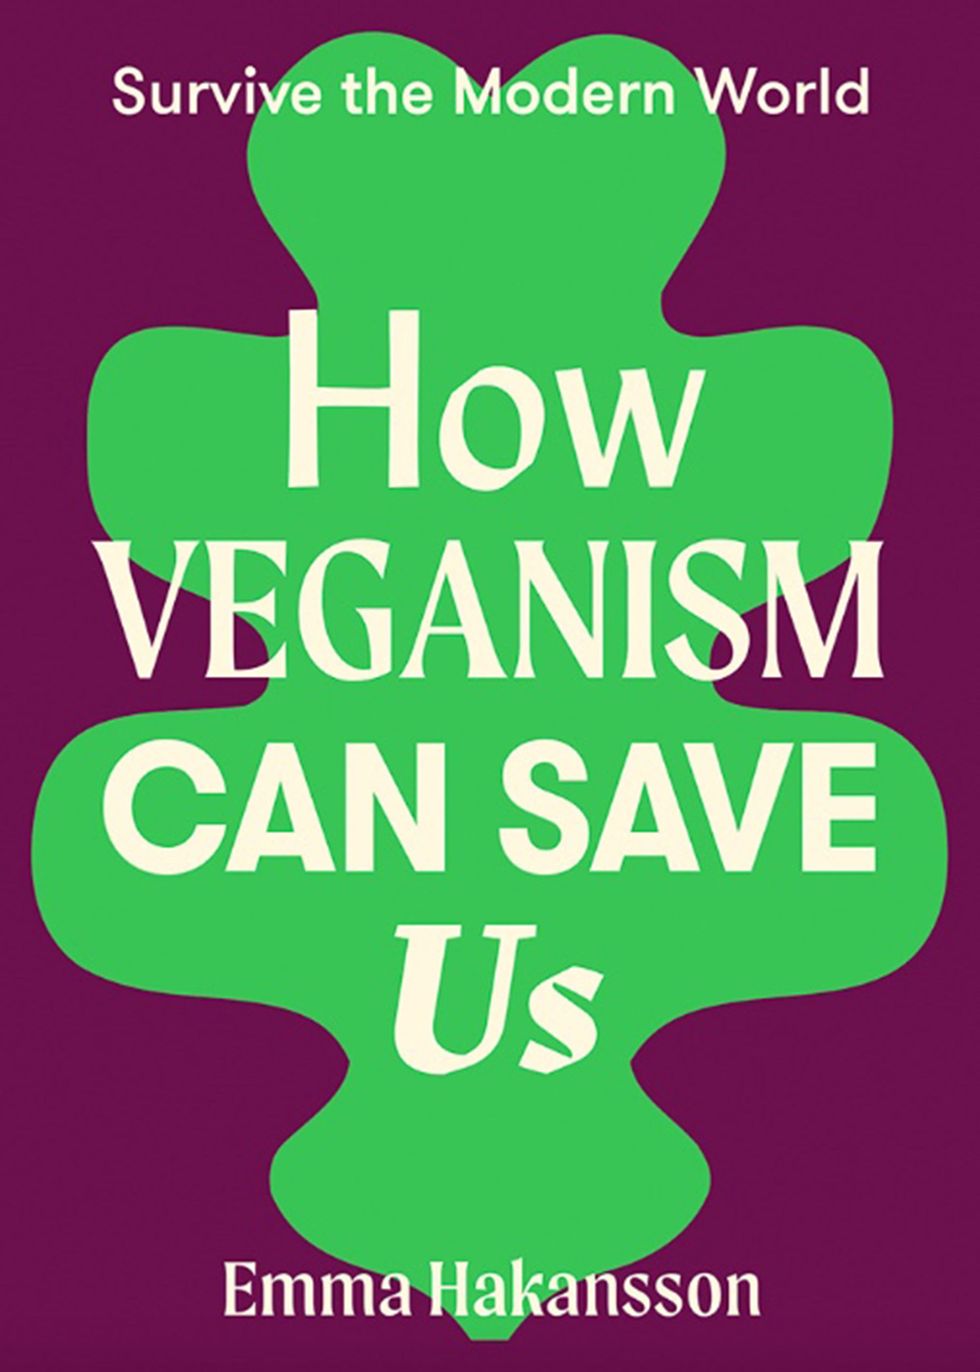 How Veganism Can Save Us